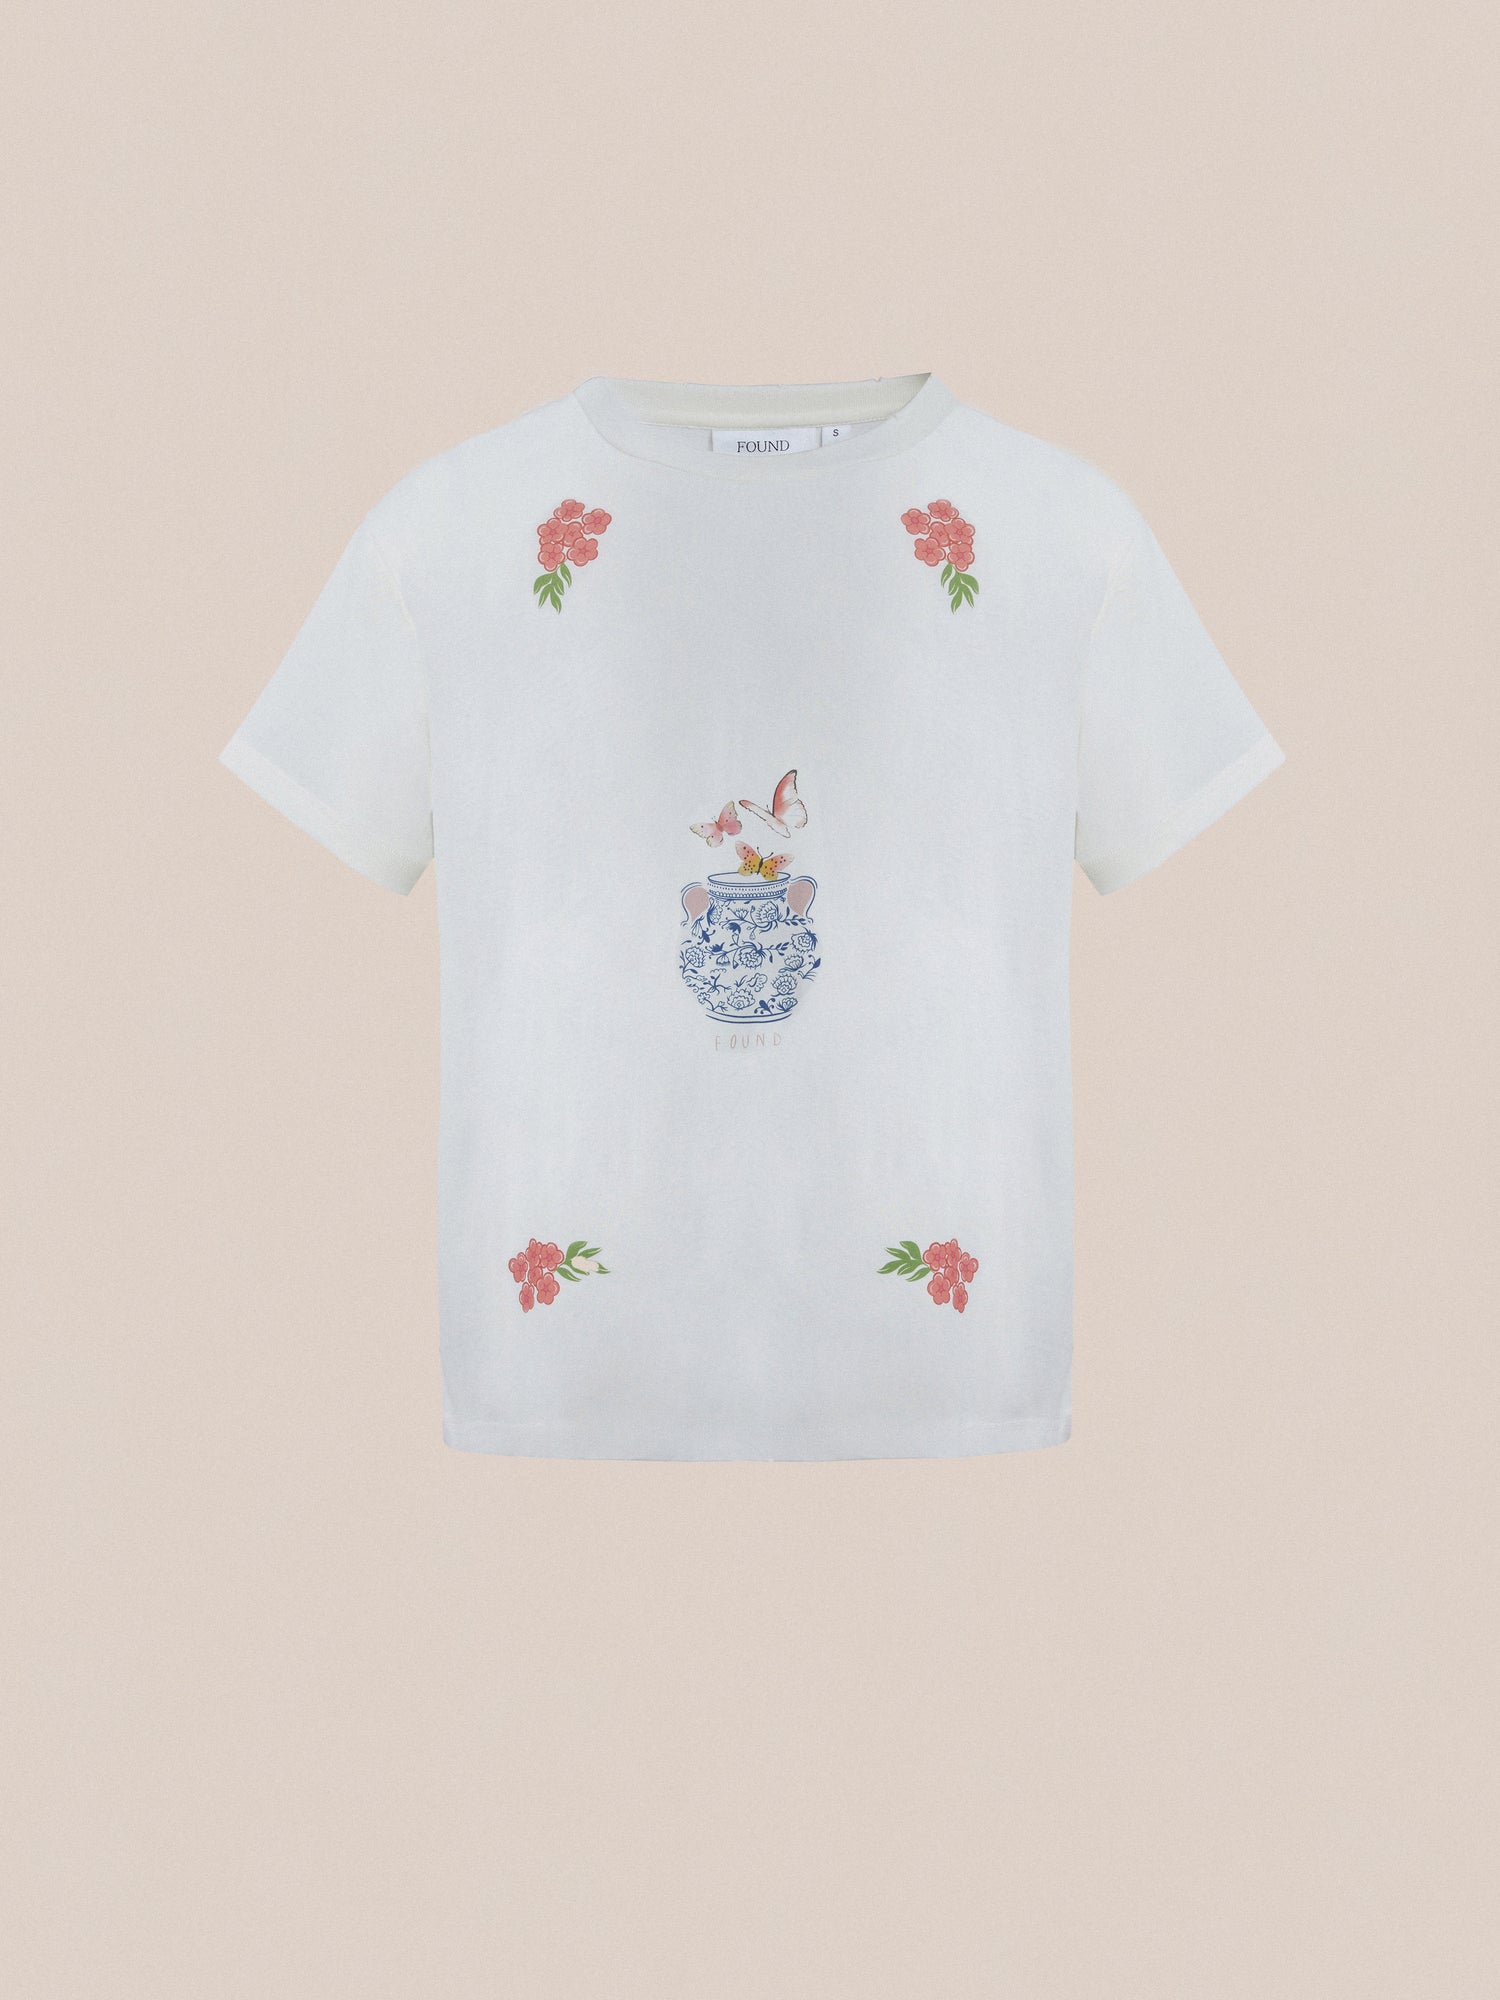 A white Found Flower Pot Tee with a flower embroidered on it, exuding springtime charm.